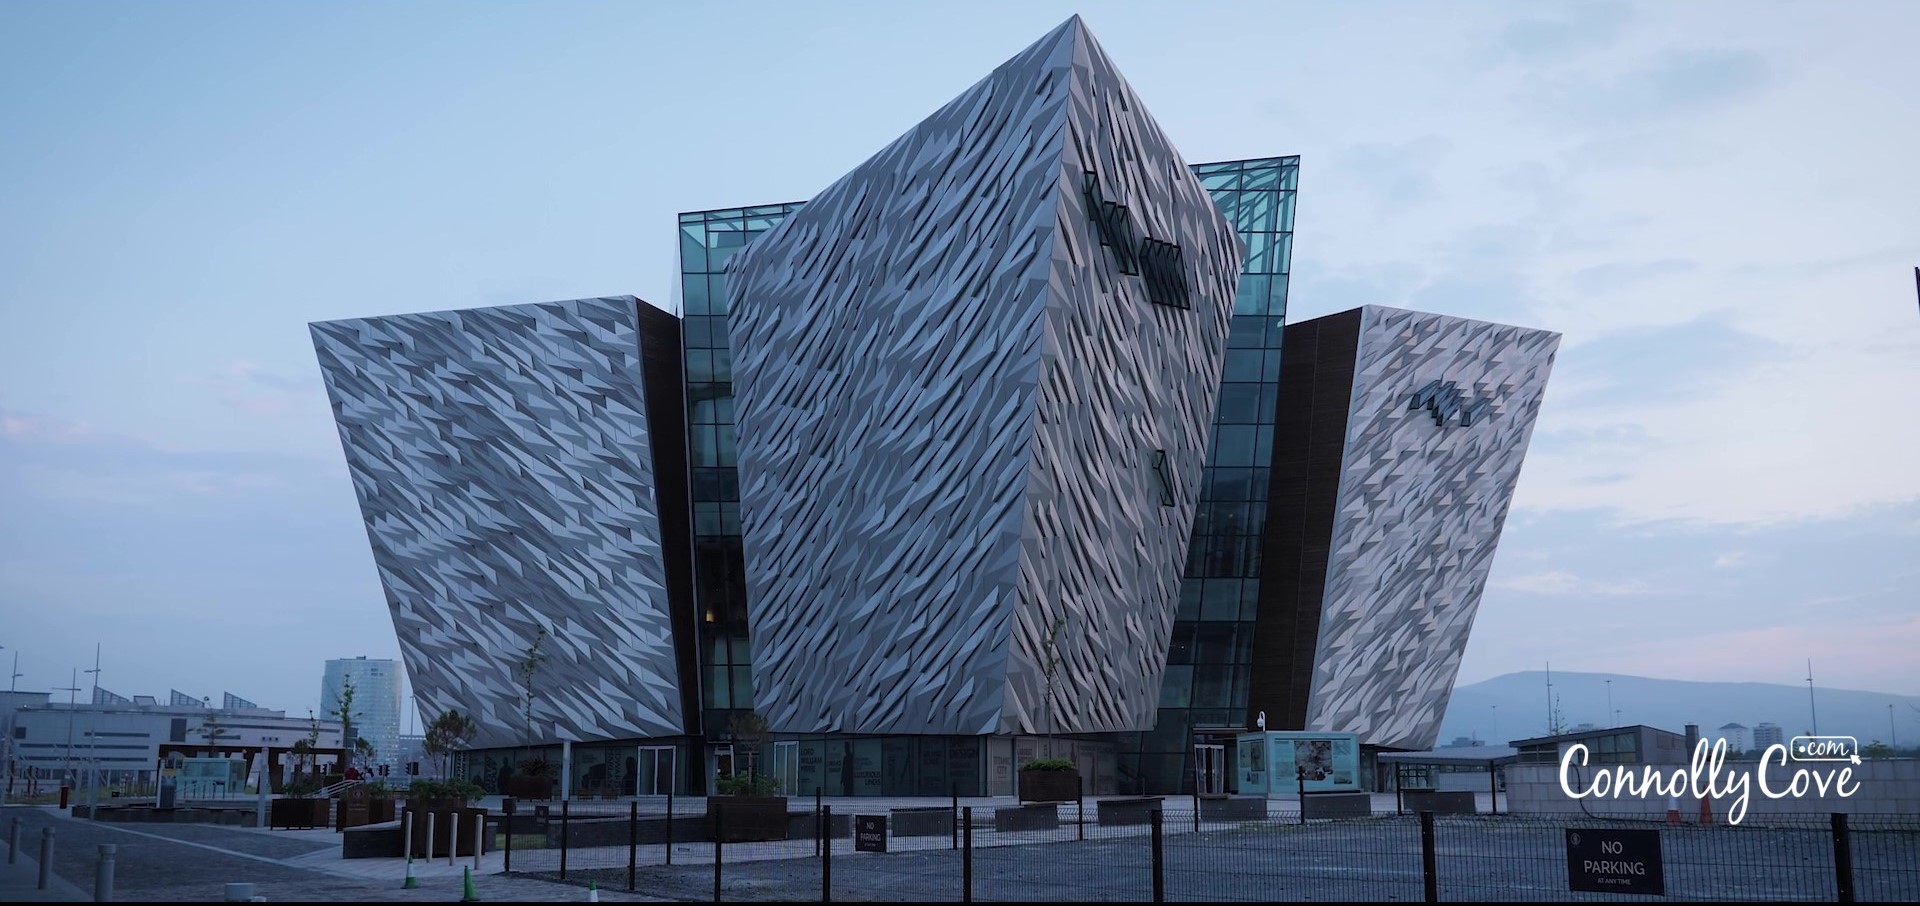 titanic studios Check out our ultimate guide to things to do in Belfast, we have made note of all the best attractions that you need to visit while on your visit to Belfast, Northern Ireland. So much to see and do you won't be bored in Belfast we can promise that!